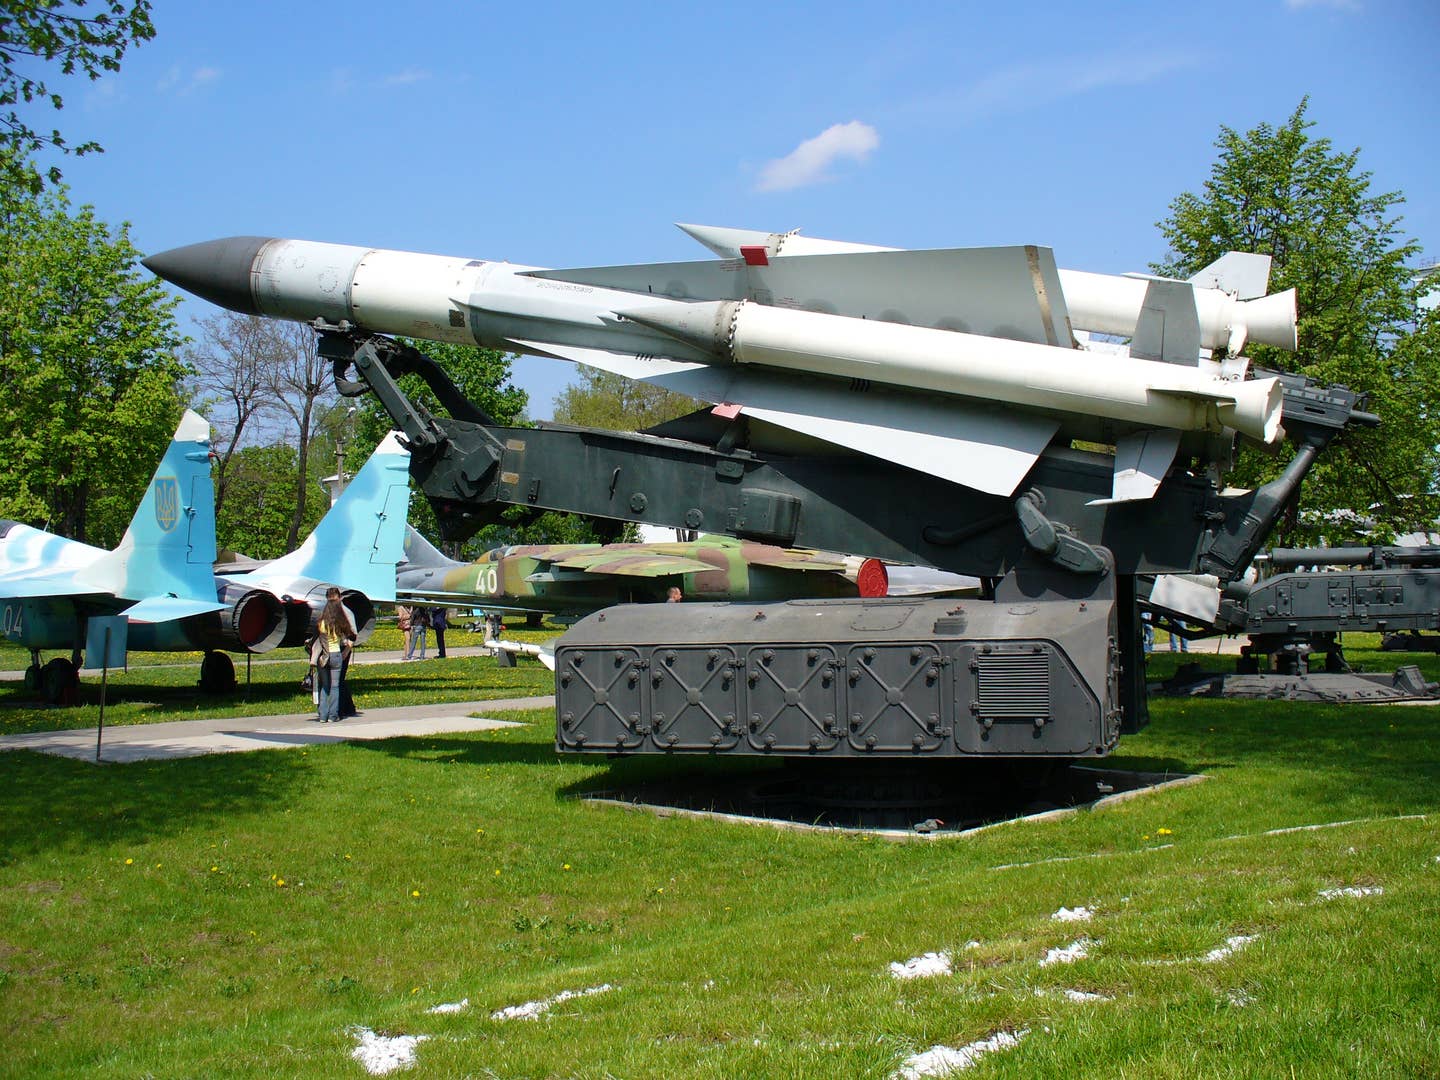 An S-200 launcher preserved at the Military History Museum of the Air Forces of the Armed Forces of Ukraine in Vinnytsia. <em>George Chernilevsky/Wikimedia Commons</em>